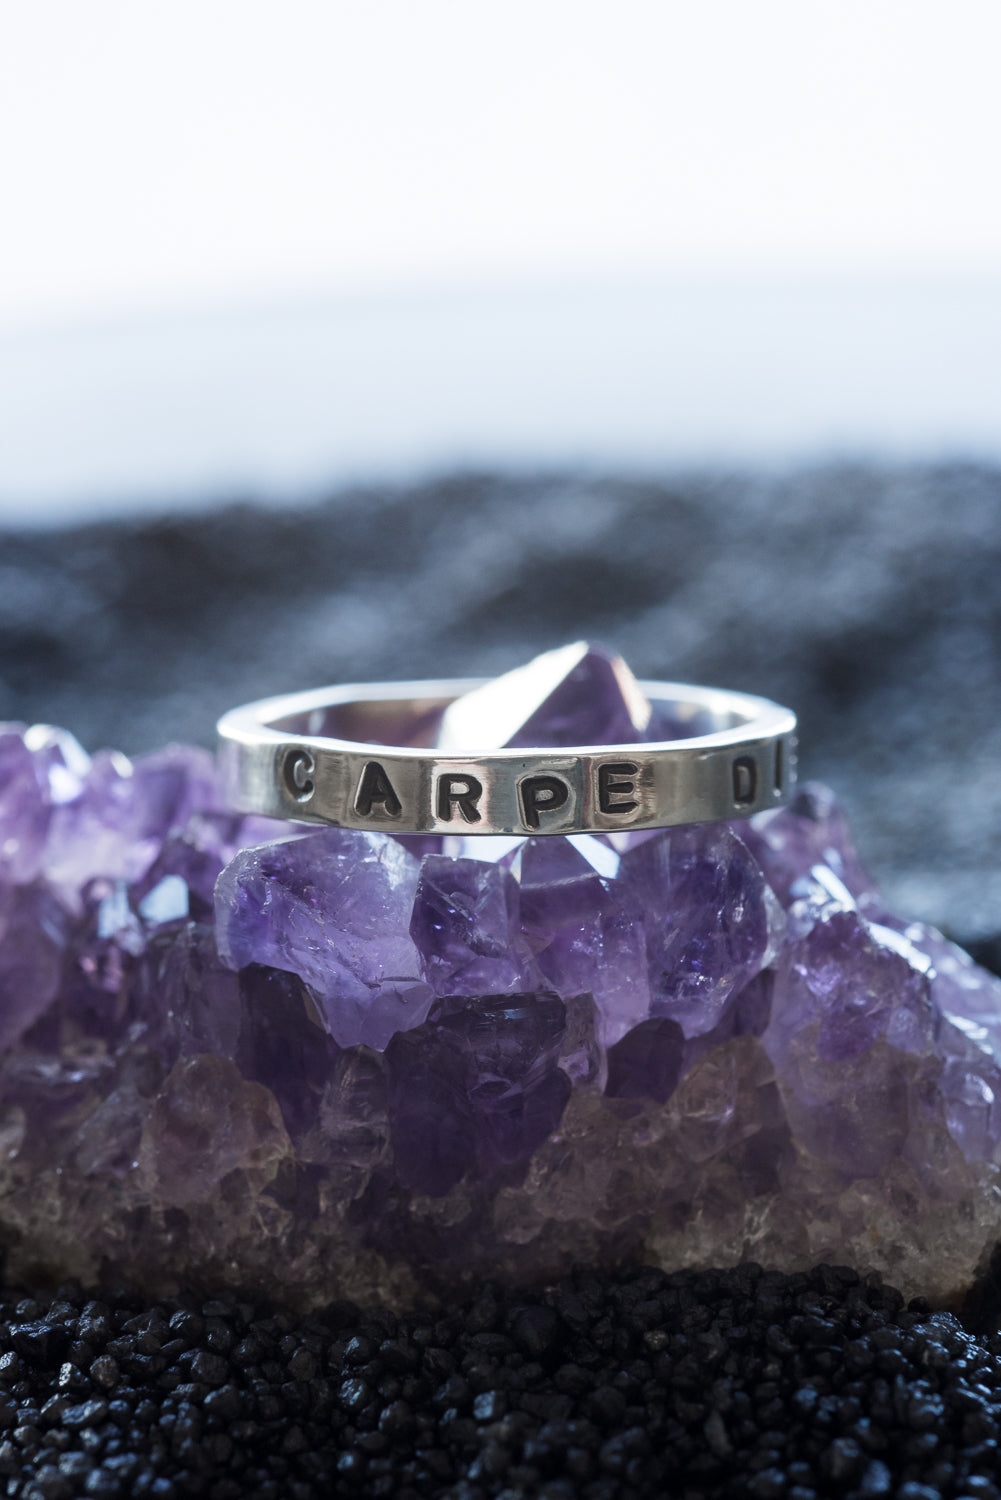 1 silver rings with the words "carpe diem" stamped into it,. It rests on a chunk of amethyst.